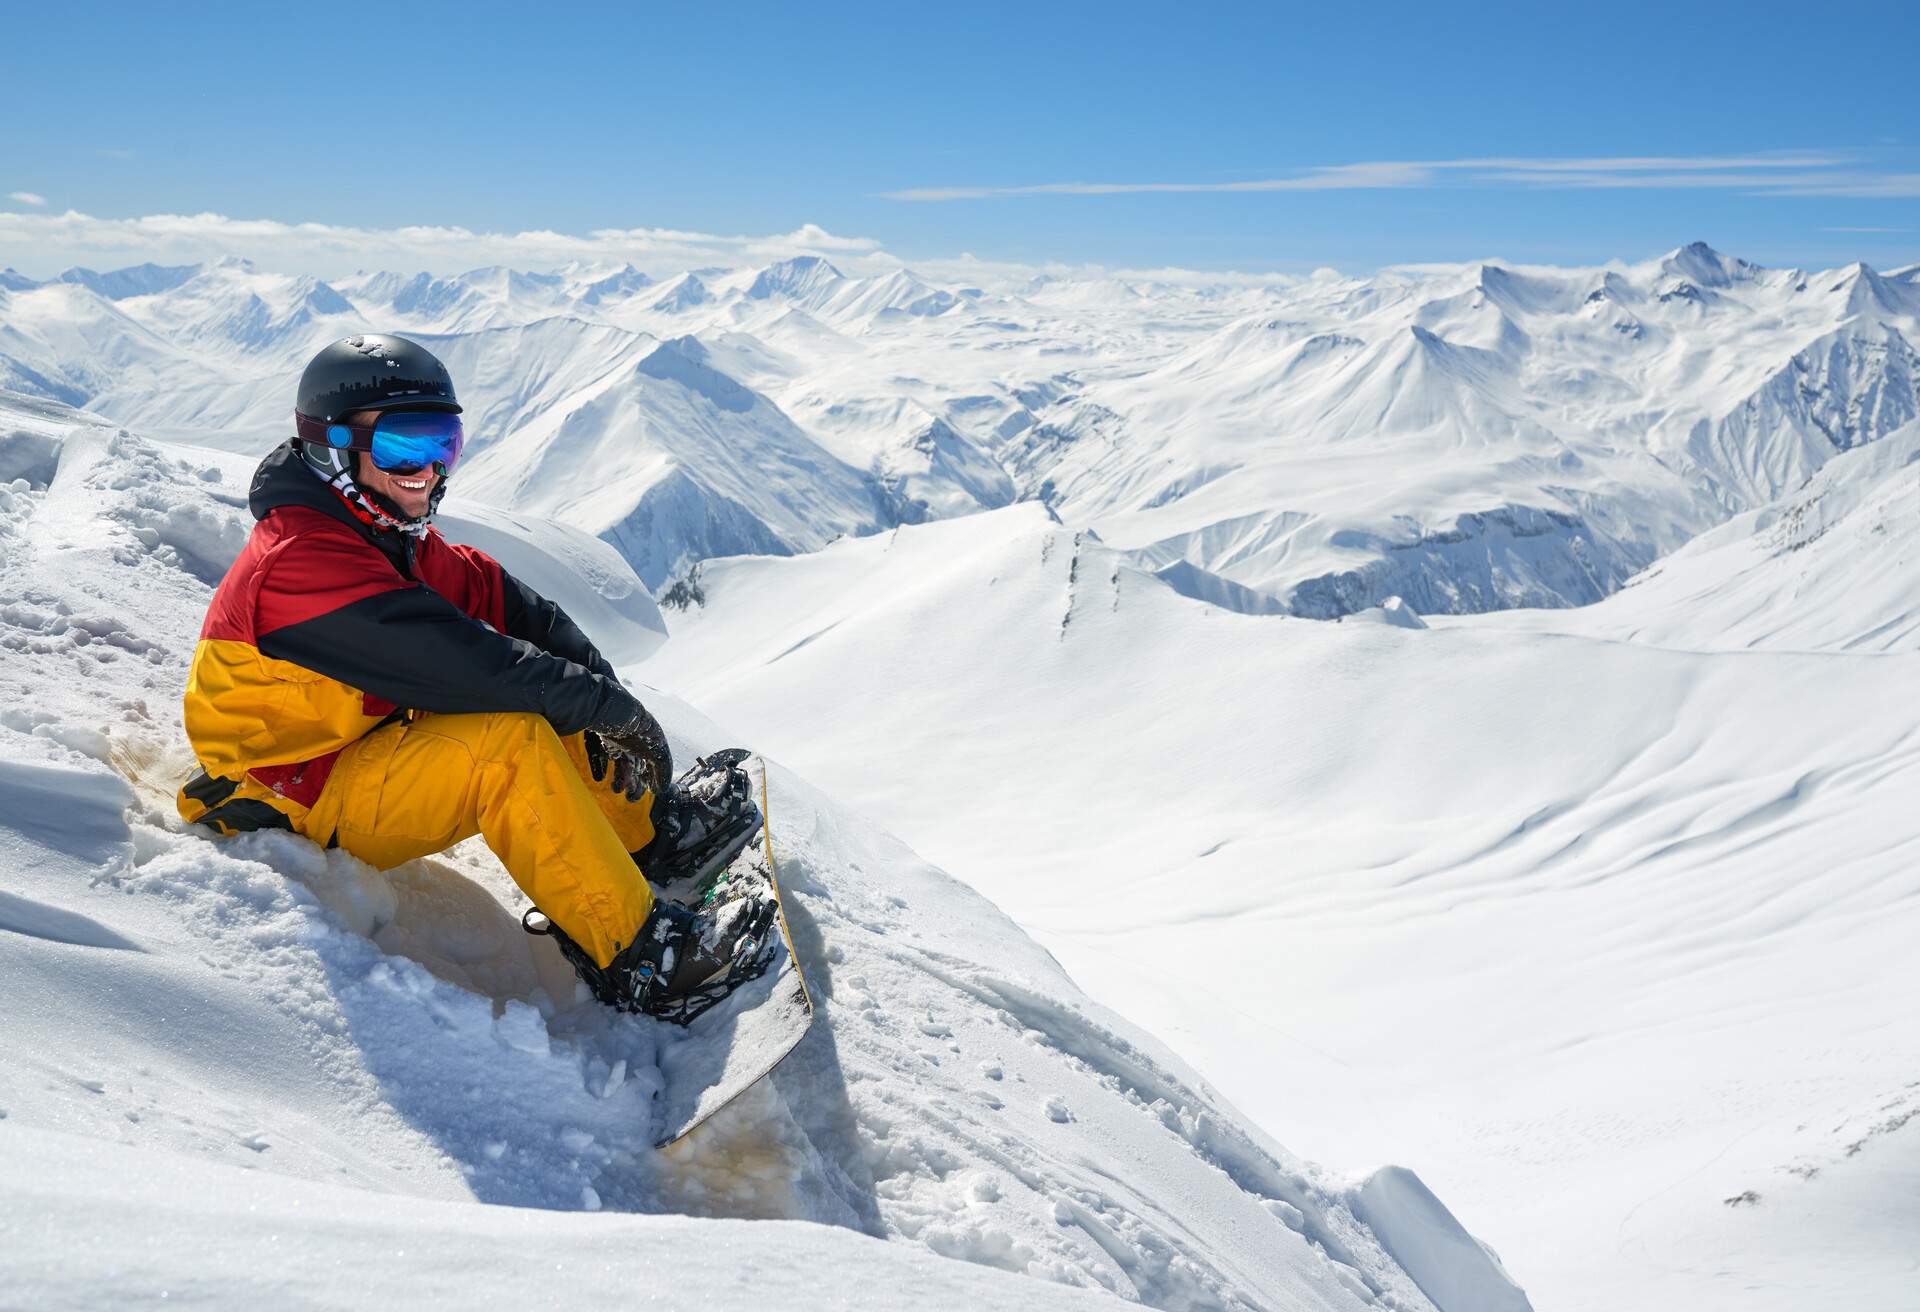 A man with a snowboard on sitting on a slope and gazing out into the snowy landscape.